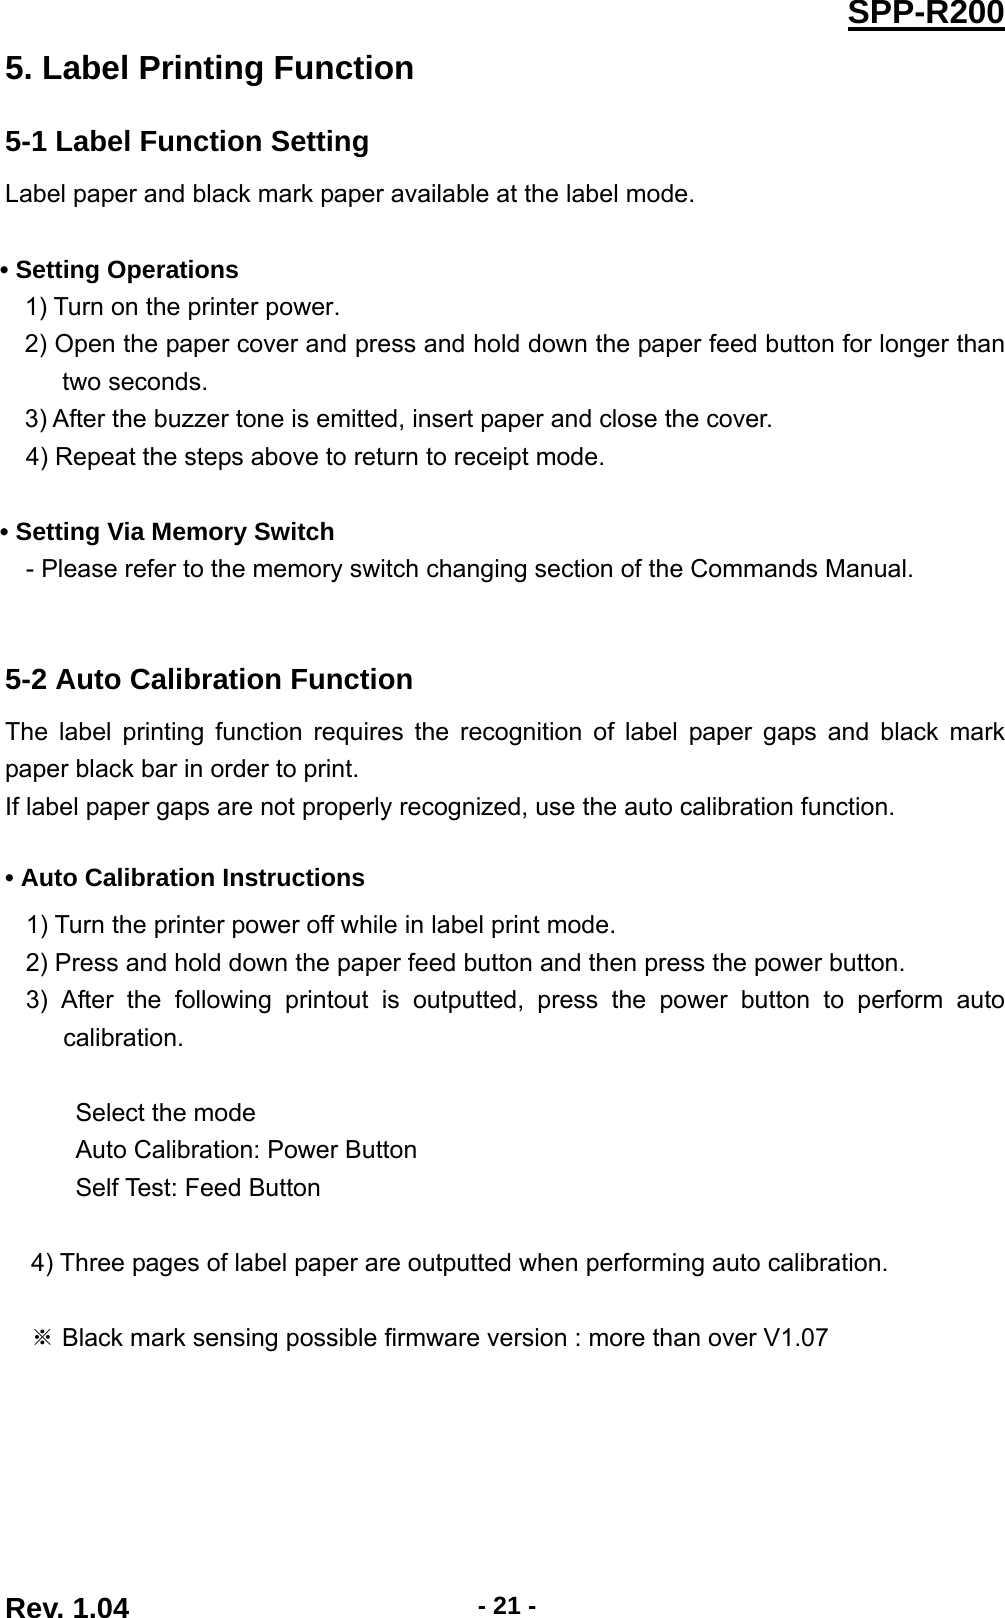  Rev. 1.04  - 21 -SPP-R2005. Label Printing Function 5-1 Label Function Setting Label paper and black mark paper available at the label mode.  • Setting Operations 1) Turn on the printer power. 2) Open the paper cover and press and hold down the paper feed button for longer than two seconds. 3) After the buzzer tone is emitted, insert paper and close the cover. 4) Repeat the steps above to return to receipt mode.  • Setting Via Memory Switch - Please refer to the memory switch changing section of the Commands Manual.   5-2 Auto Calibration Function The label printing function requires the recognition of label paper gaps and black mark paper black bar in order to print. If label paper gaps are not properly recognized, use the auto calibration function.  • Auto Calibration Instructions 1) Turn the printer power off while in label print mode. 2) Press and hold down the paper feed button and then press the power button. 3) After the following printout is outputted, press the power button to perform auto calibration.  Select the mode Auto Calibration: Power Button Self Test: Feed Button   4) Three pages of label paper are outputted when performing auto calibration.   Black mark sensing possible firmware version : more than over V1.07 